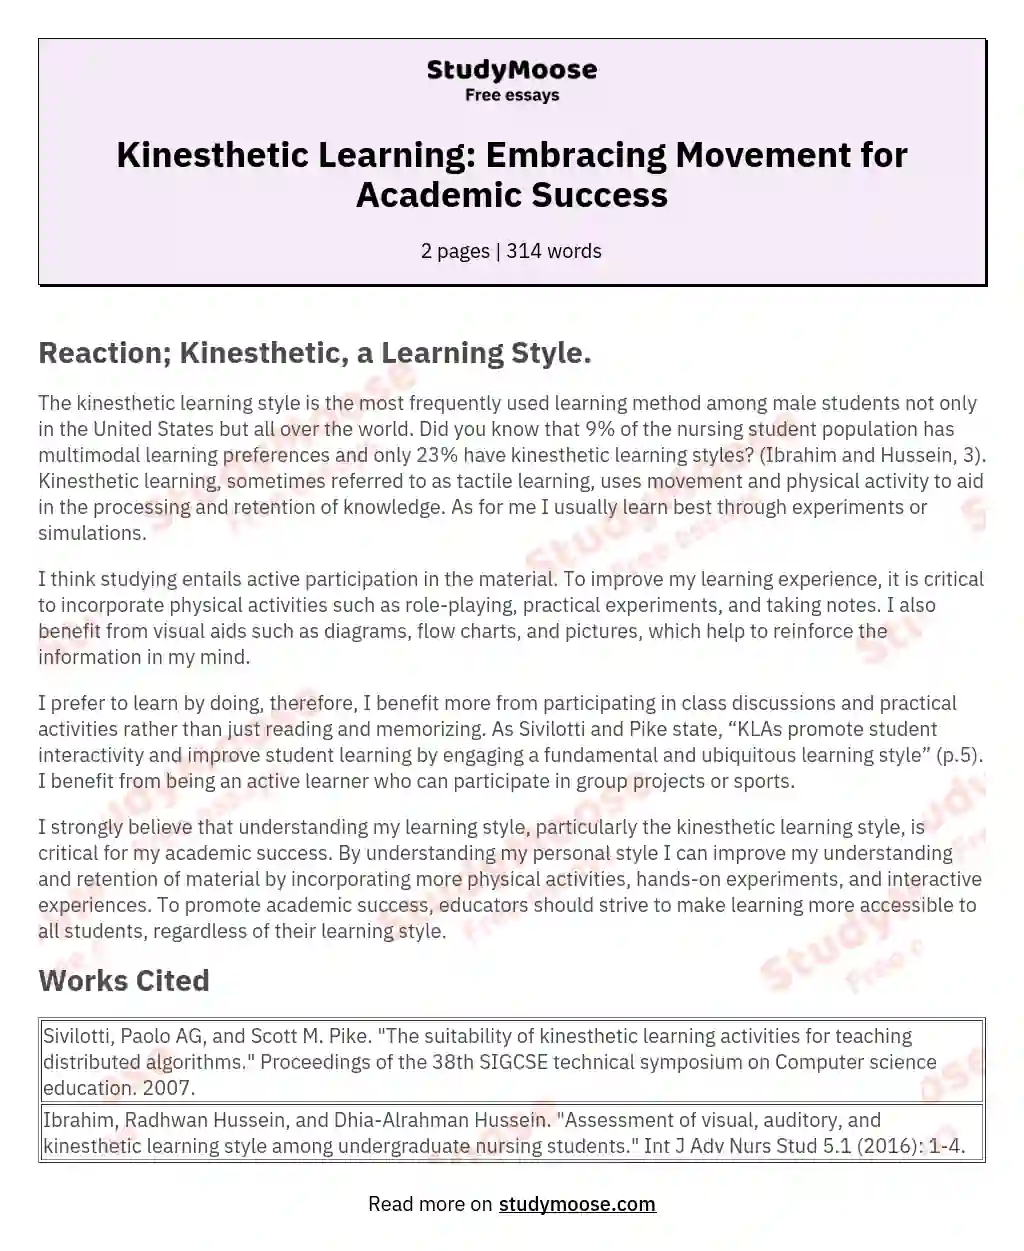 Kinesthetic Learning: Embracing Movement for Academic Success essay